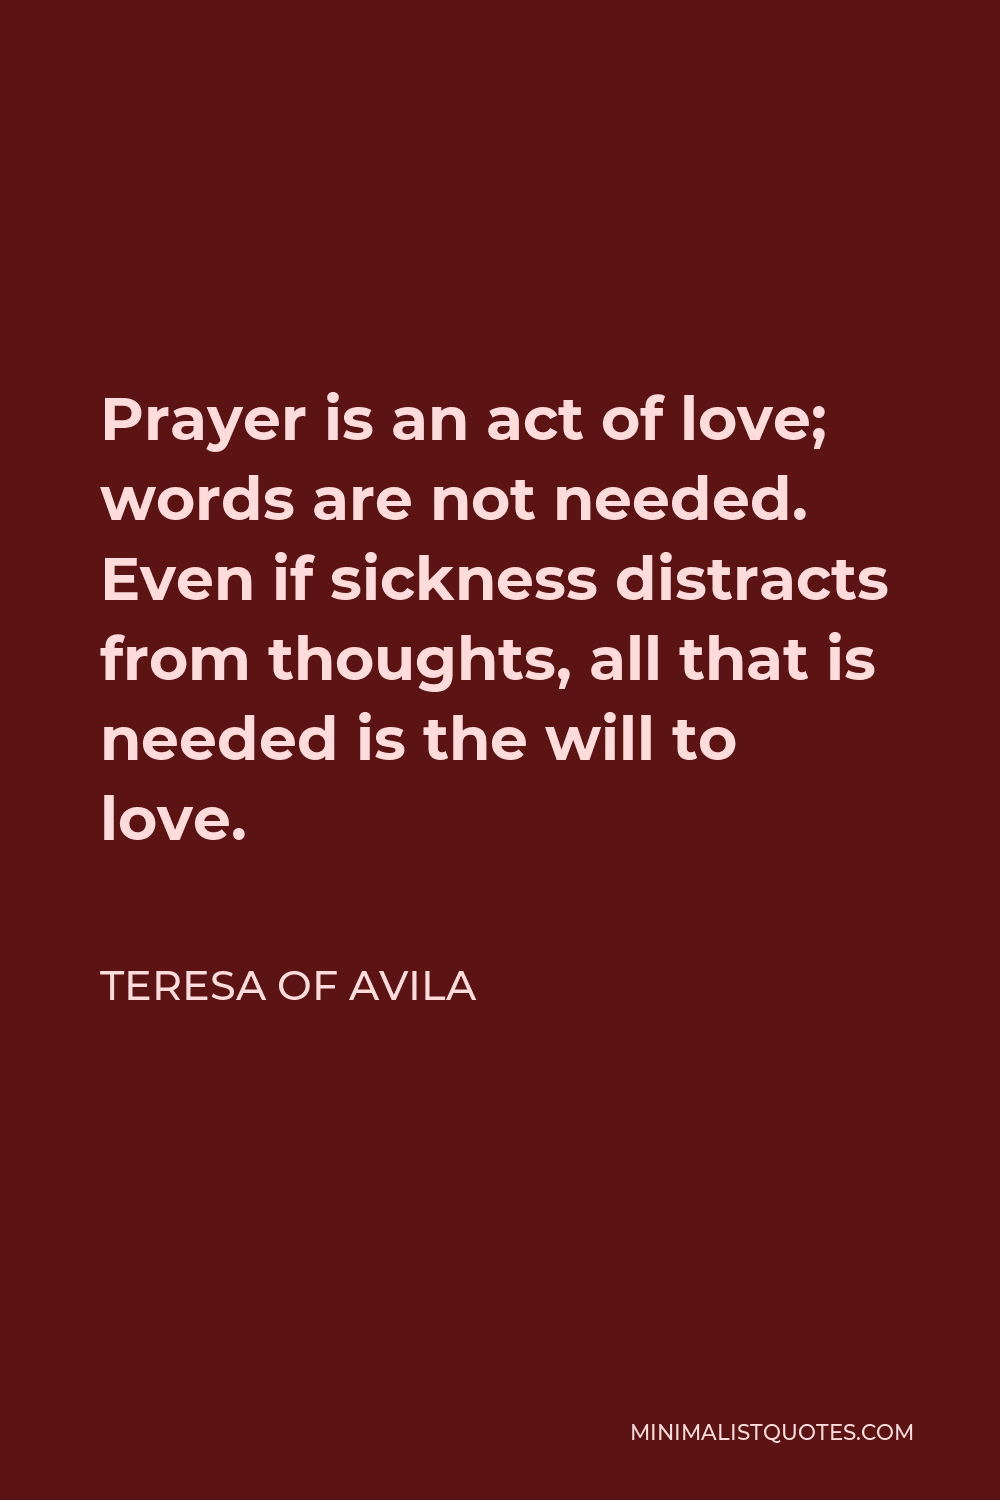 Teresa of Avila Quote - Prayer is an act of love. Words are not needed.